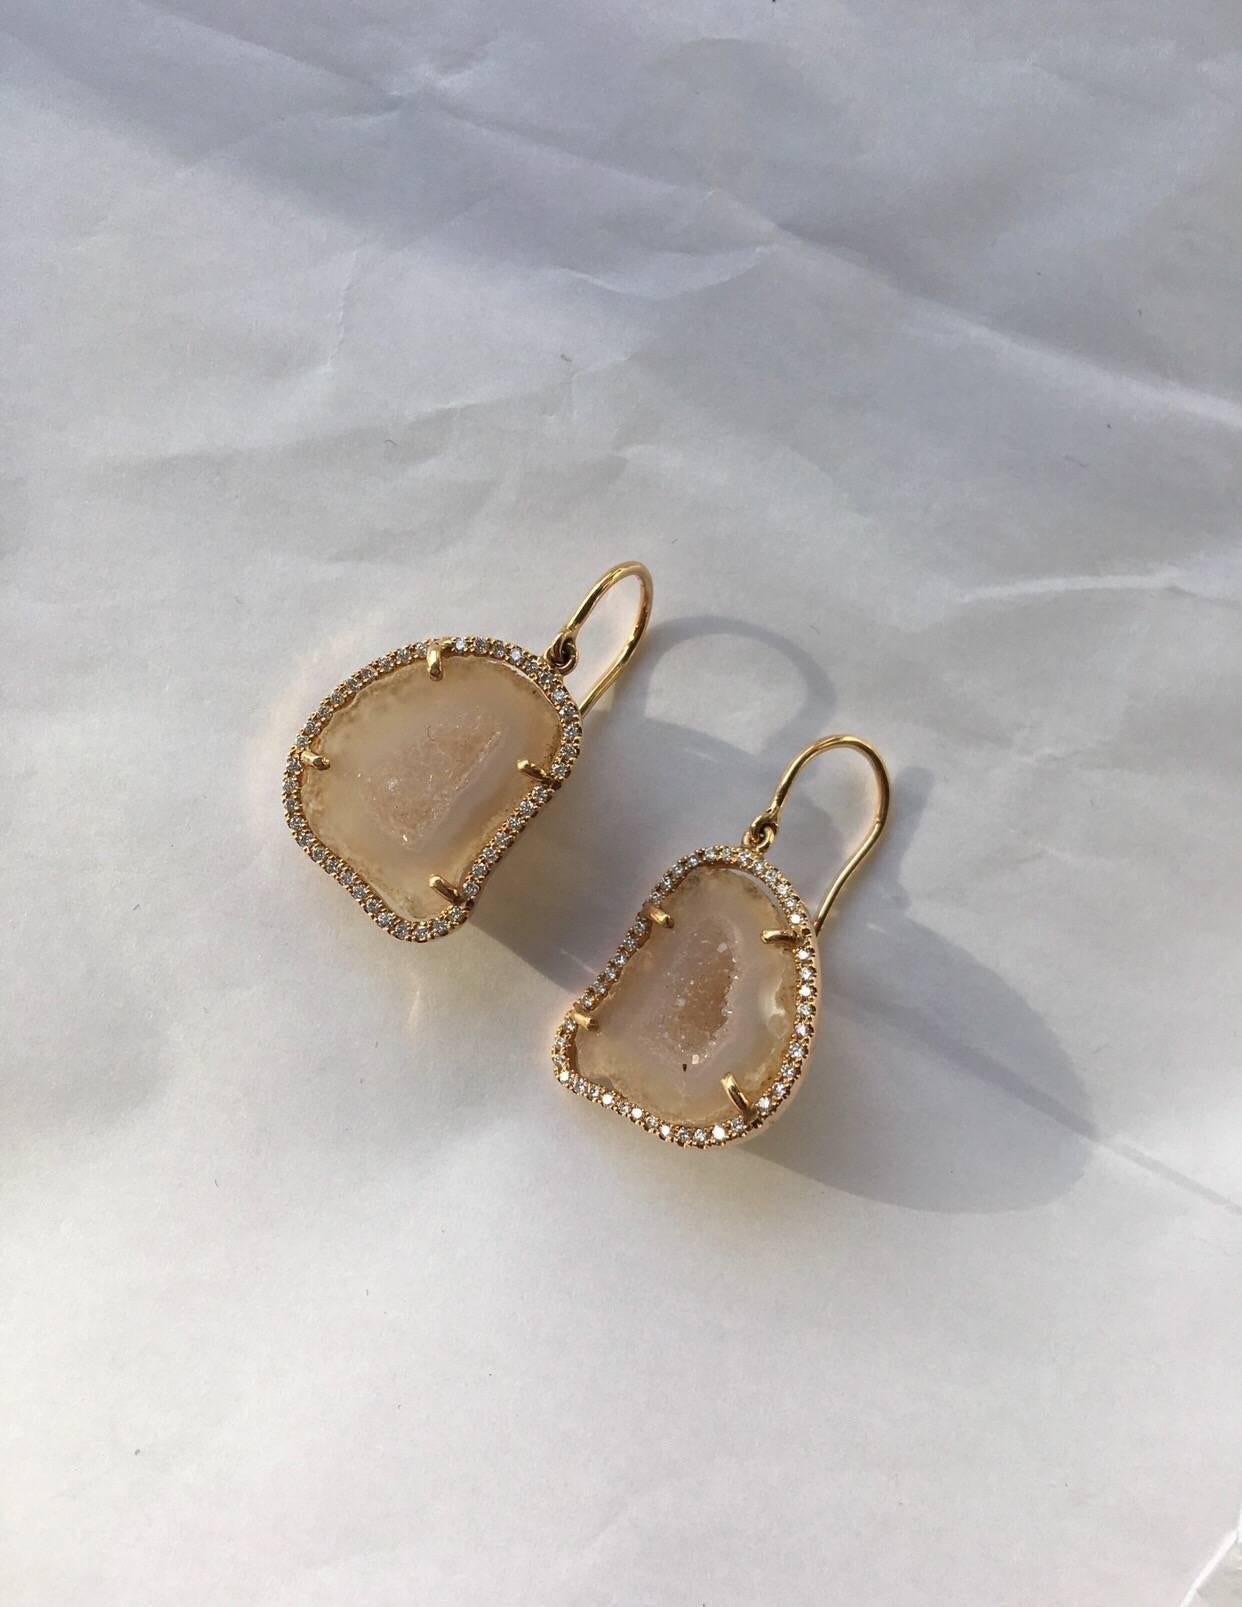 Like the Rays of Sun!
These 18k rose gold Agate geode earrings will lighten up your day!
Set with a halo of 0.50 ct gvs diamonds, they reflect even sunshine on a rainy day.
Perfect in Summer but even better in Winter.
